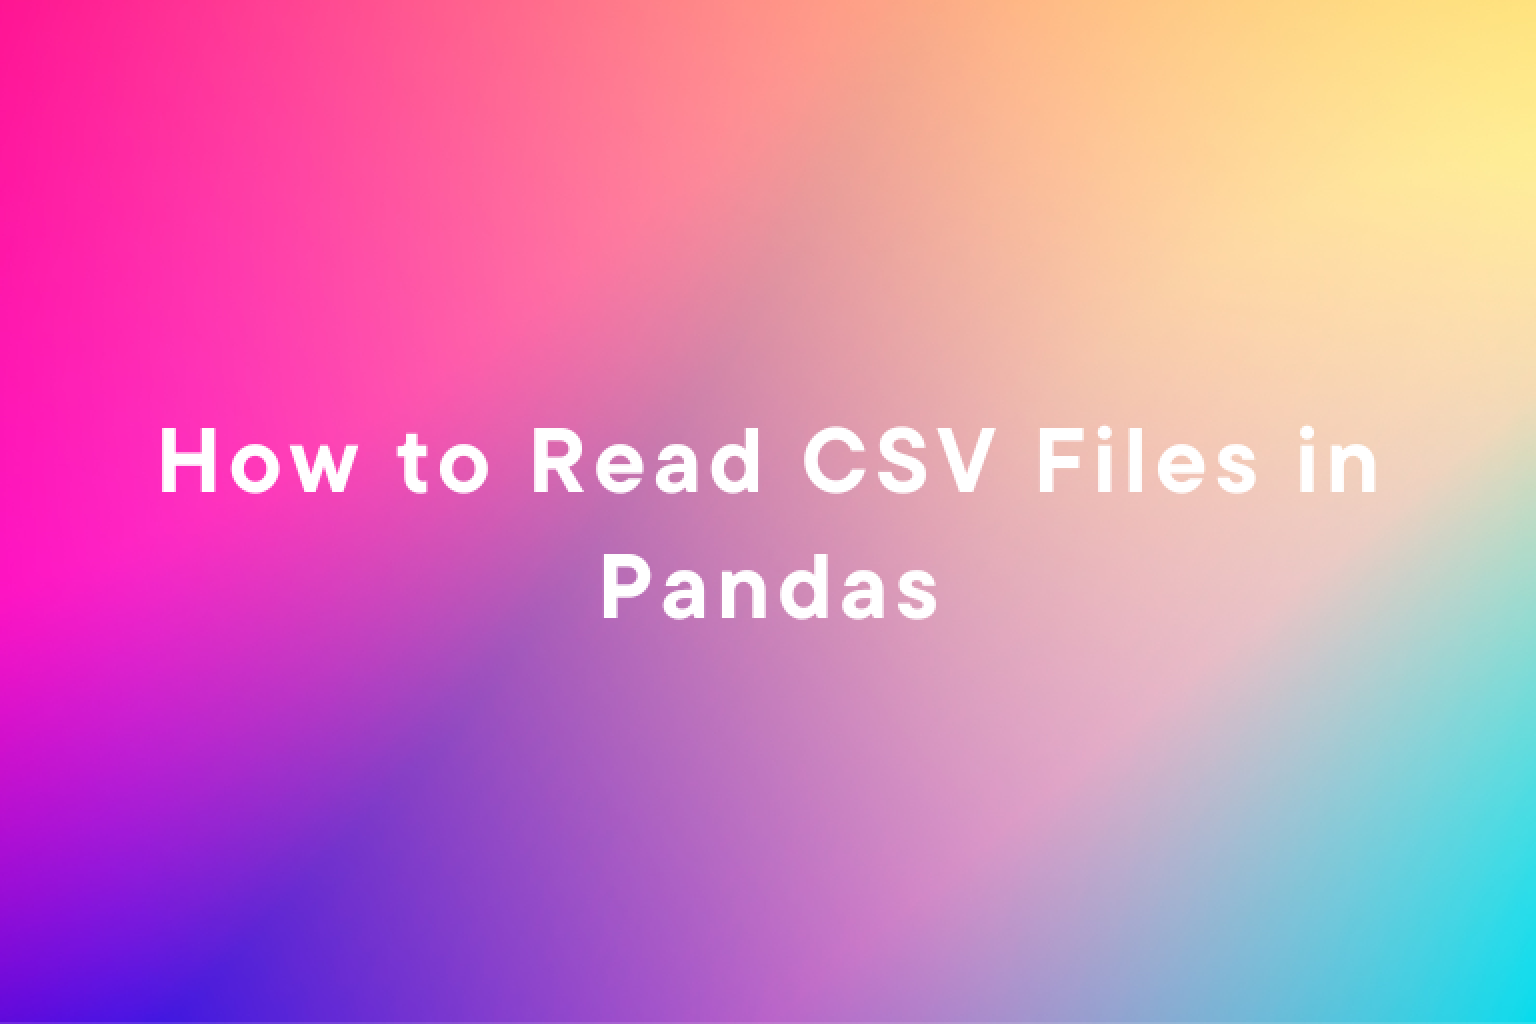 Learn how to read CSV files in Pandas, including skipping columns/rows, selecting columns, and setting data types, with PyGWalker as a bonus tool for data visualization.